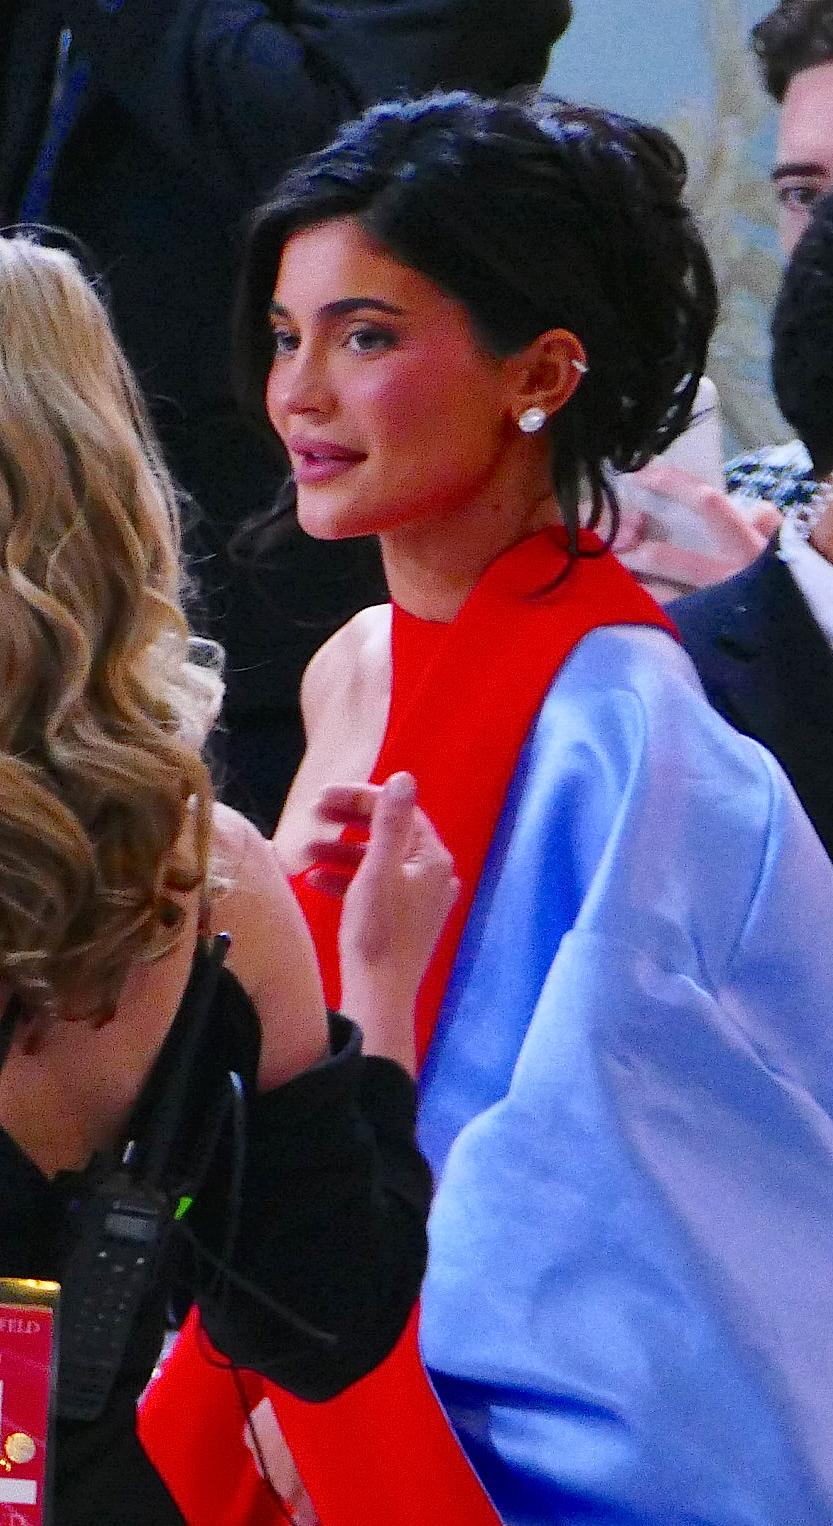 Kylie Jenner shows off her amazing flowing red dress as she stuns on the carpet during the Met Gala NYC